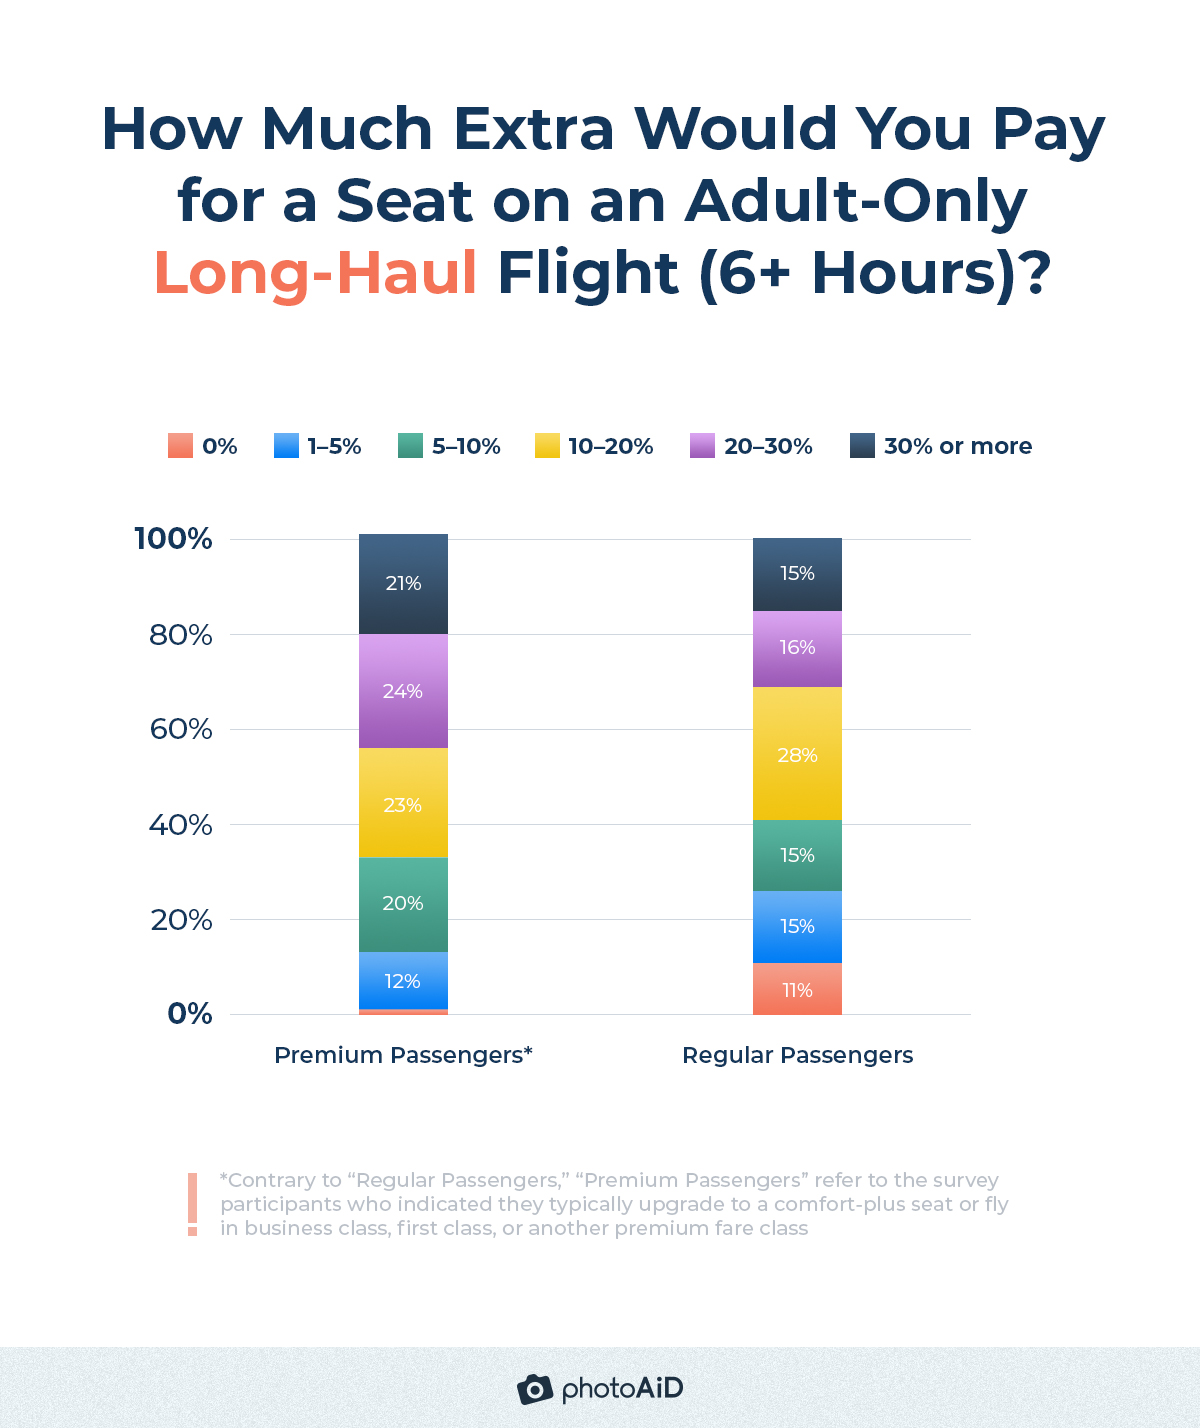 most travelers (64%) would spend between 10 and 30% or more on an adult-only long-haul flight